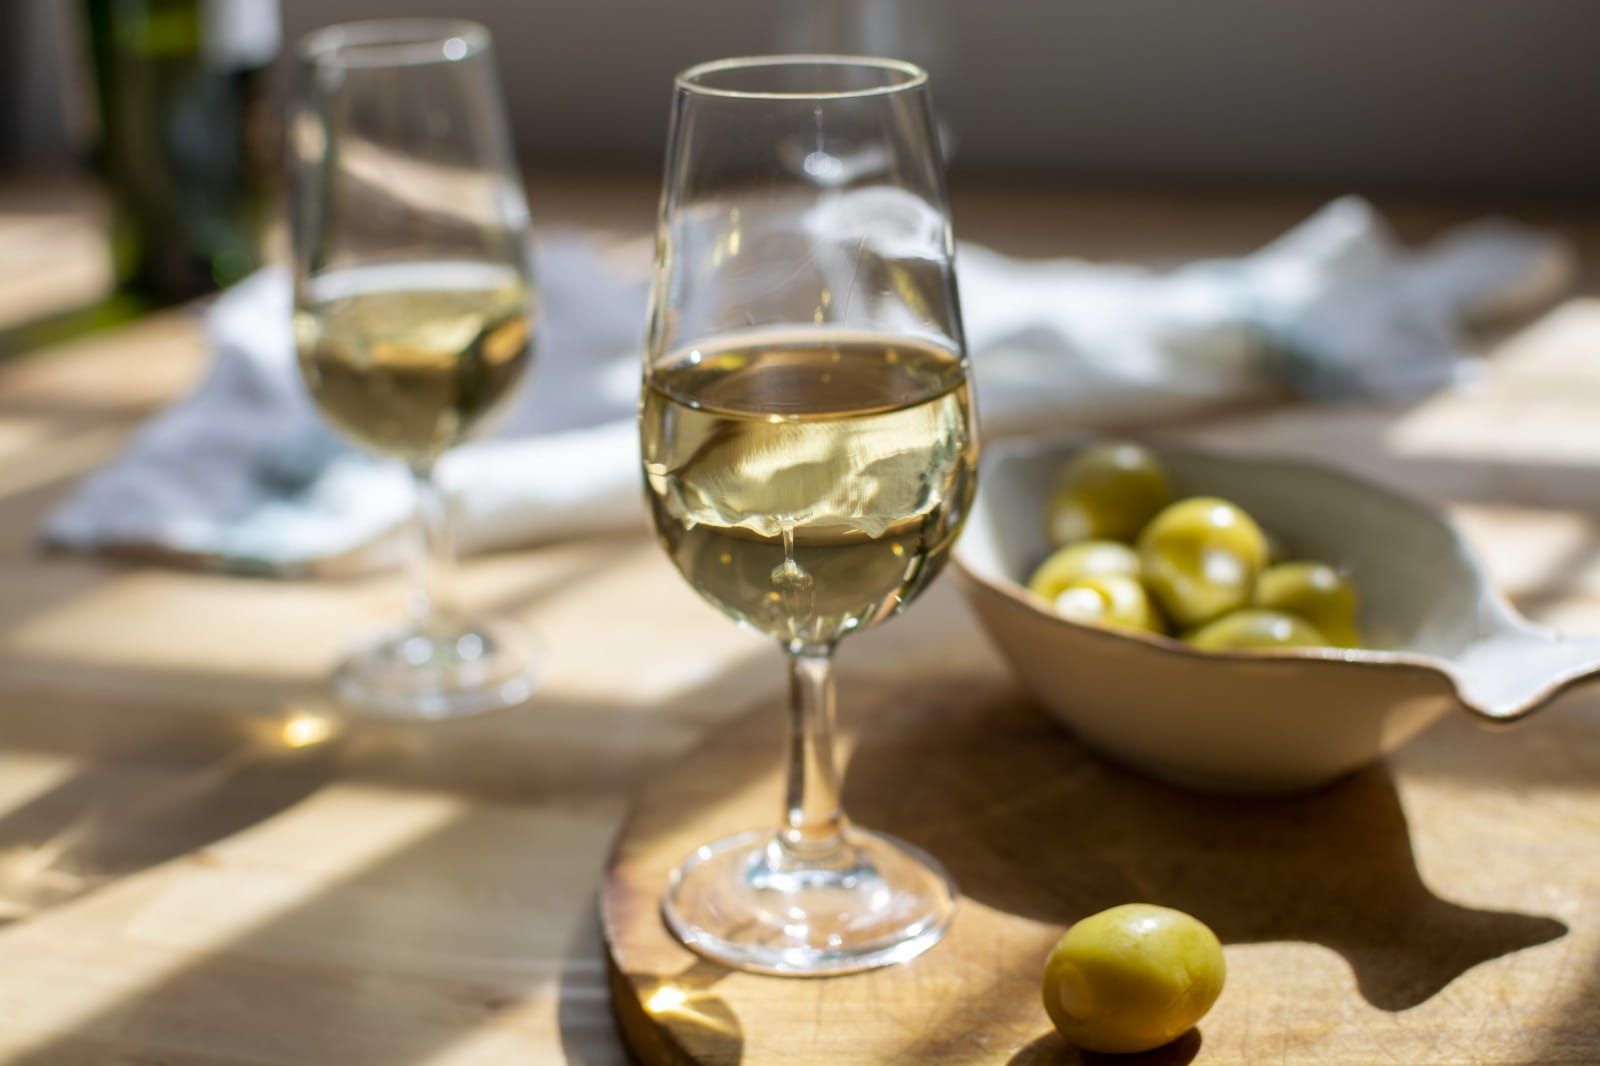 The best pairings for fino and manzanilla sherry